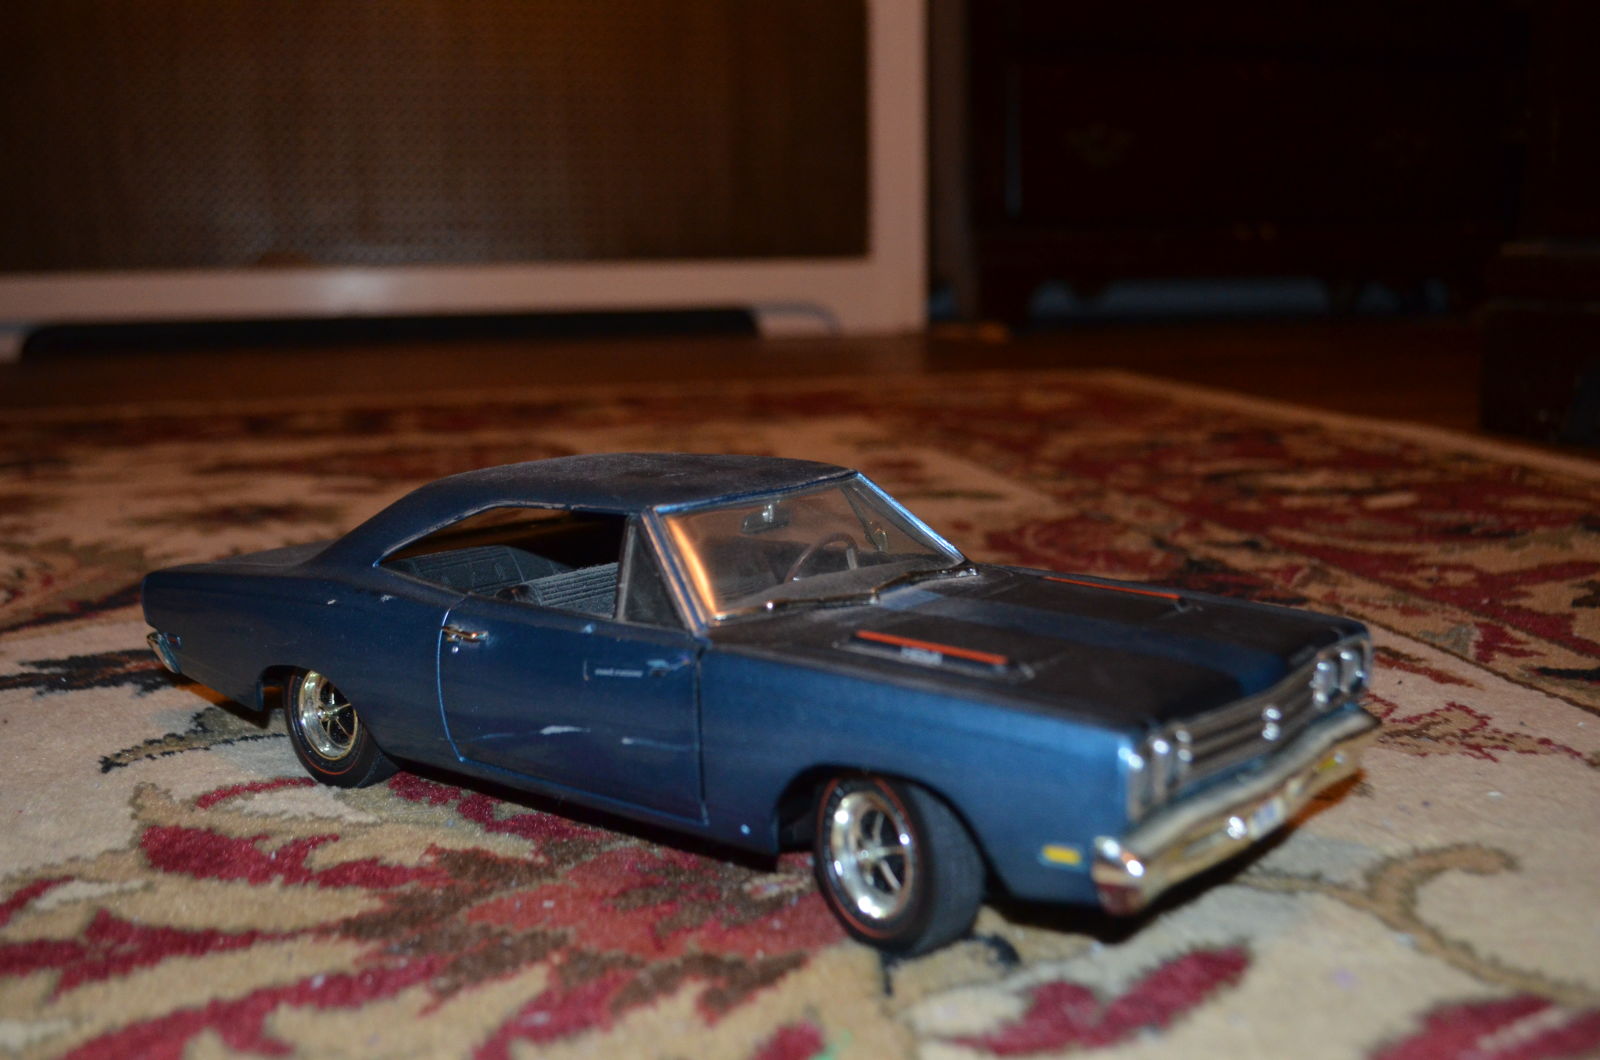  1/18 Plymouth Road Runner. Scuffs on passenger door, small touched up paint spot in black stripe on front of hood.  